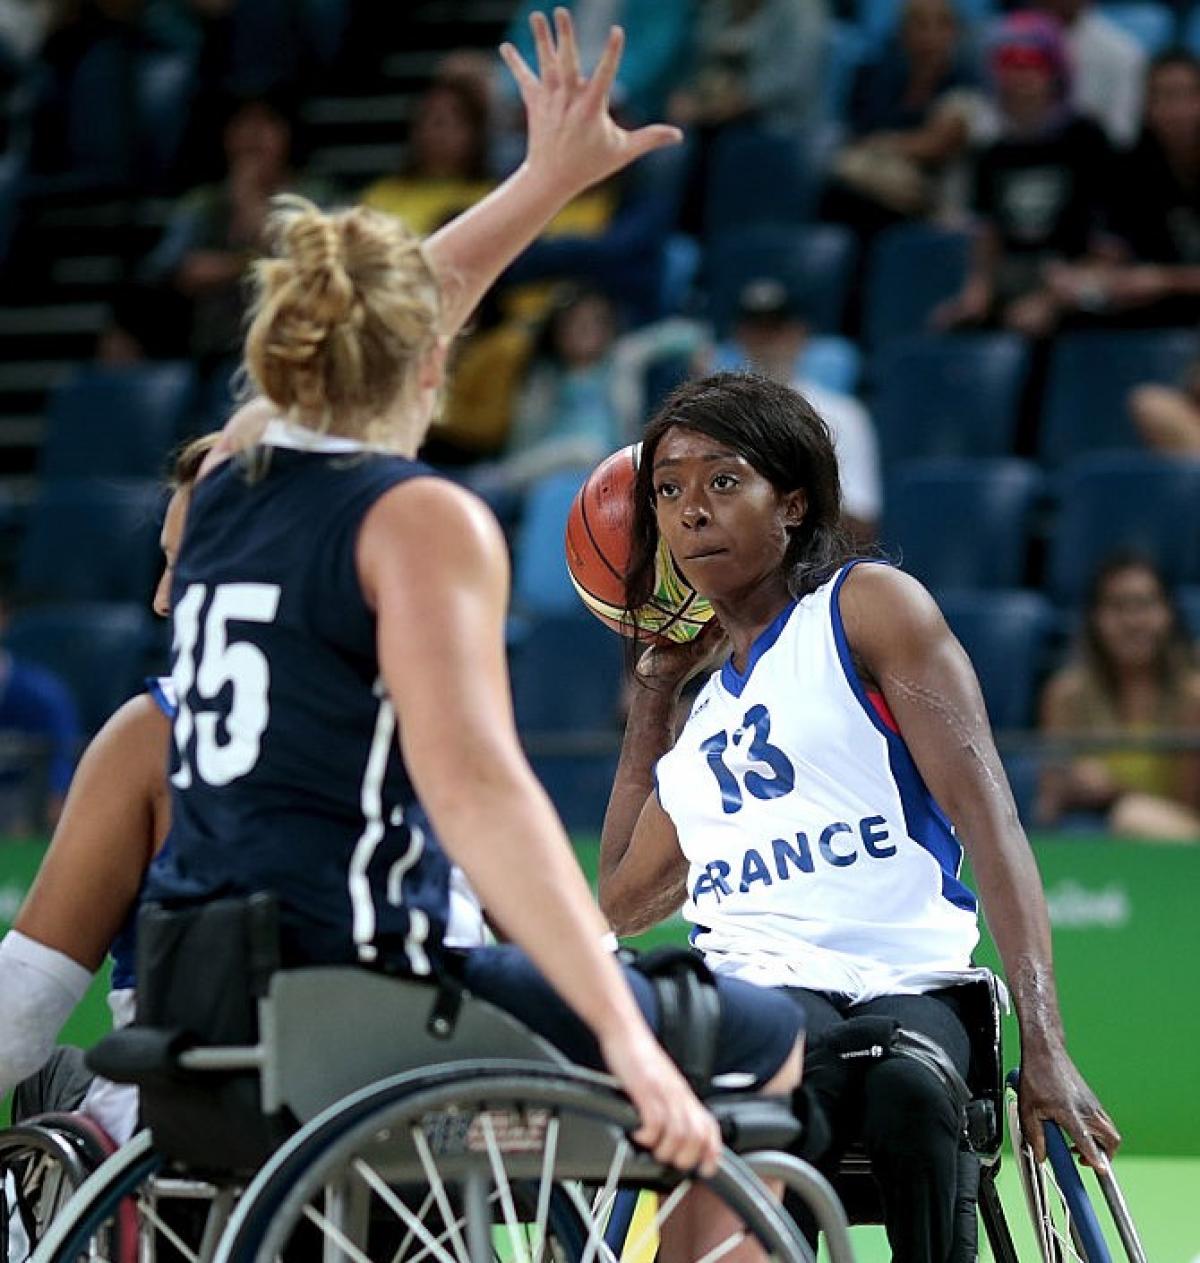 Female wheelchair basketball player defended strongly by her opponent